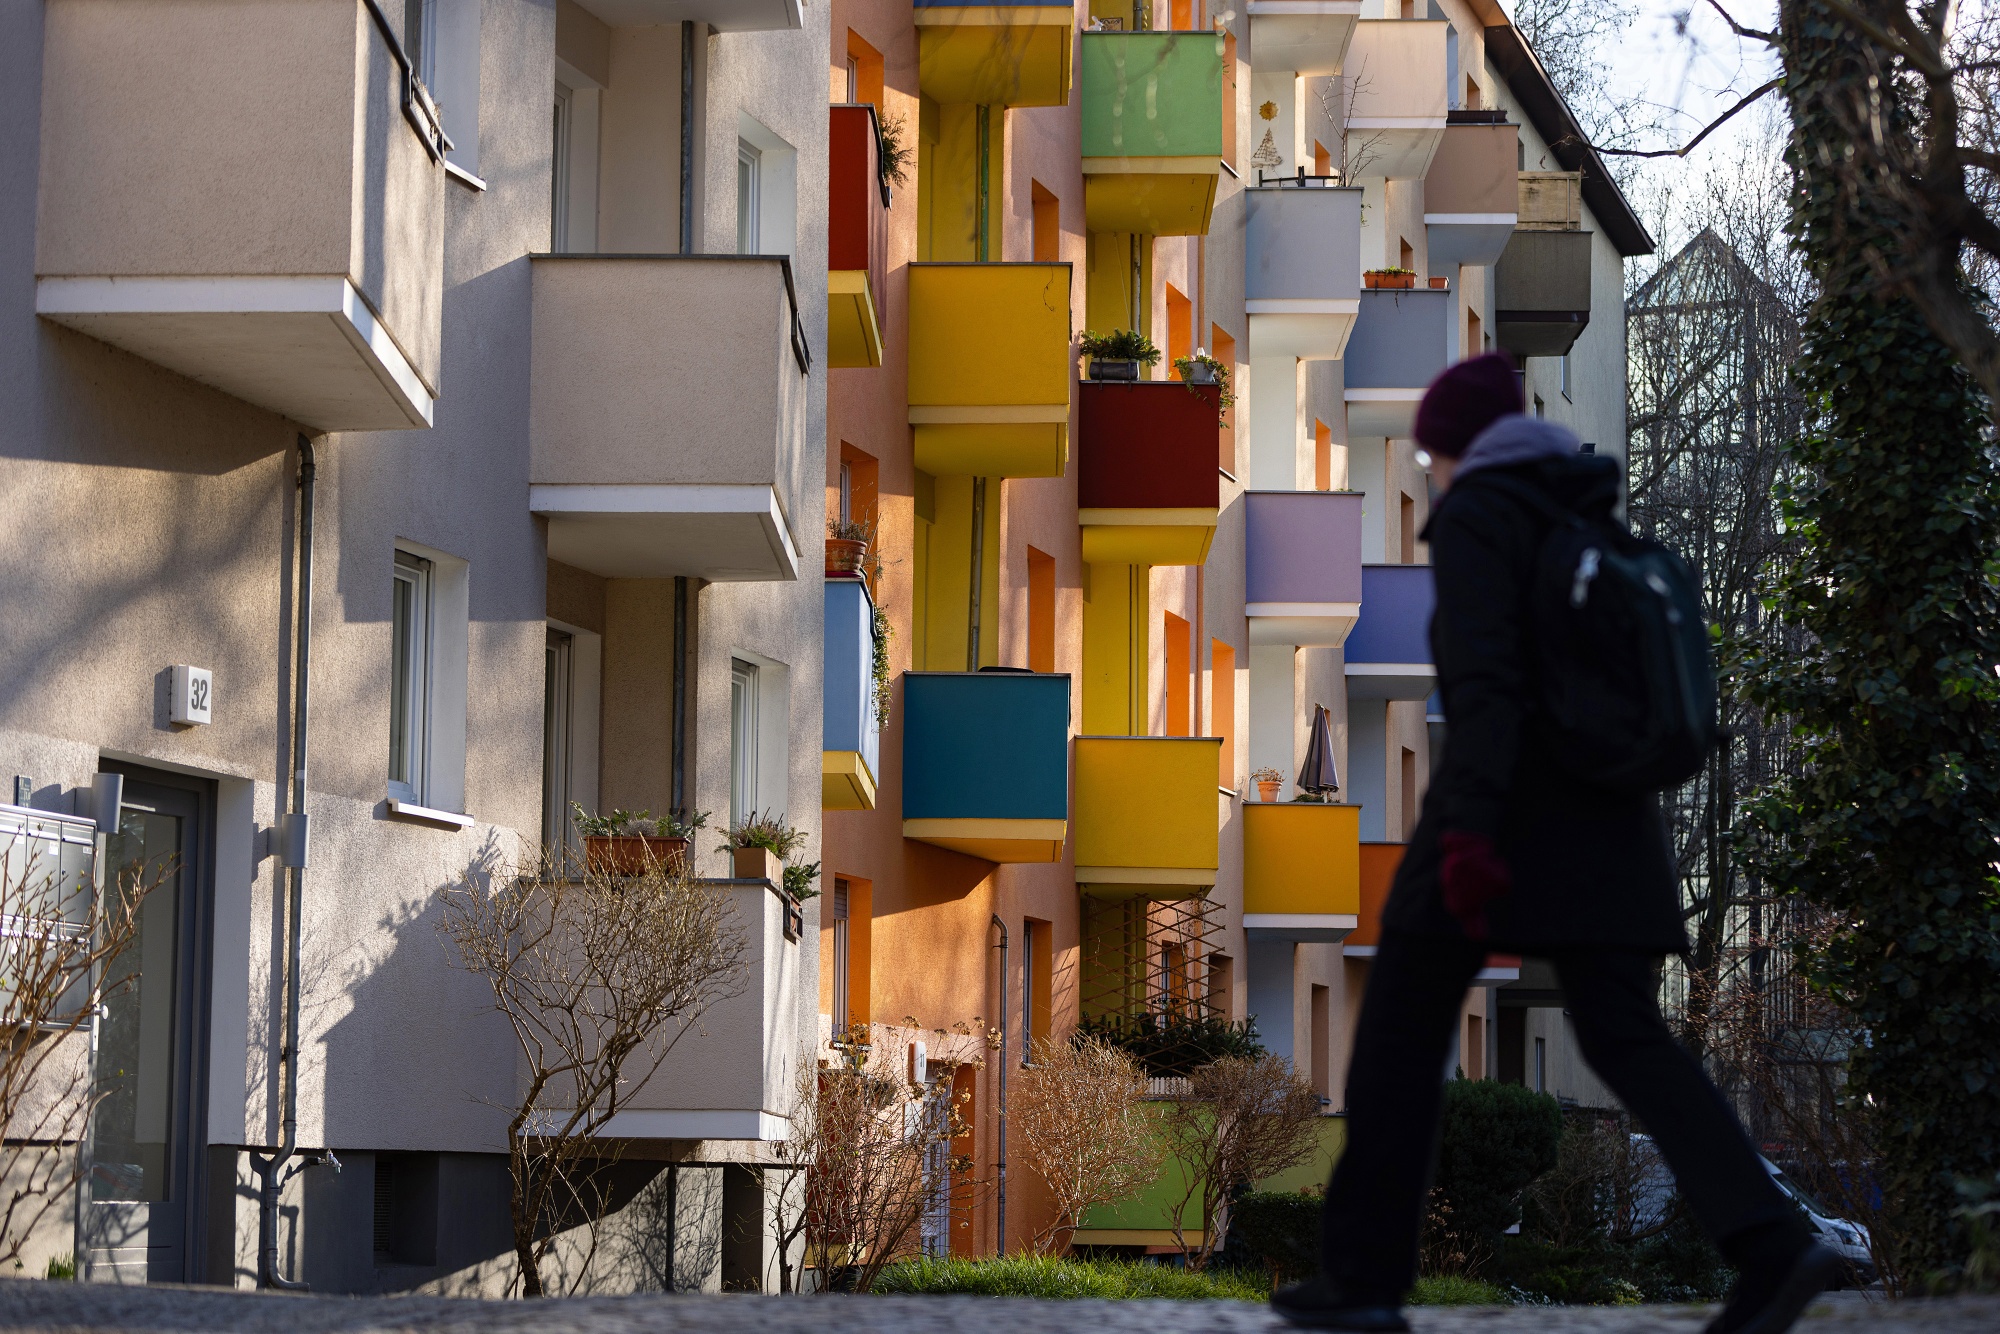 Berlin Housing: The Prospect of Higher Rents Is Luring Investors